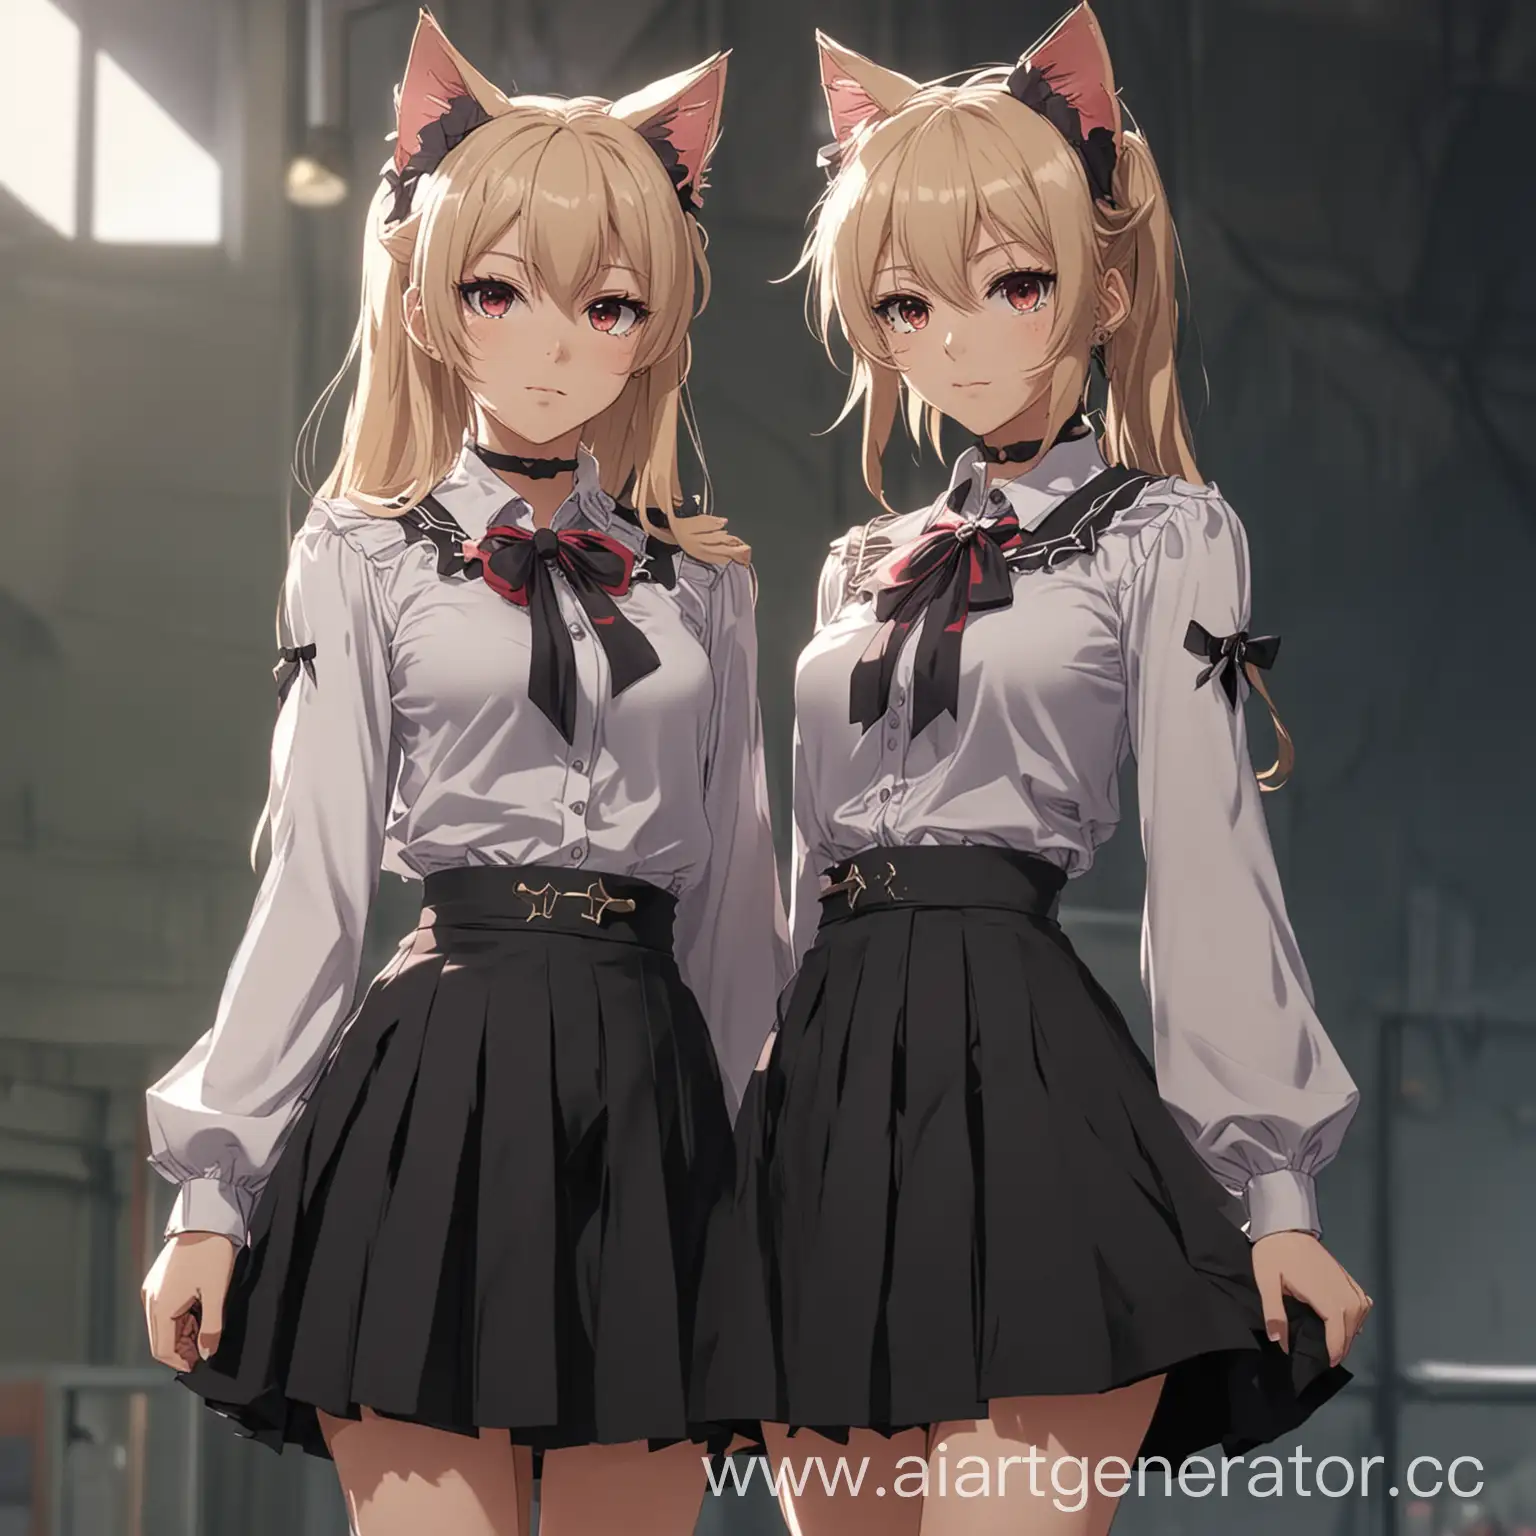 Anime-Characters-Delta-and-Zeta-with-Cat-Ears-and-Stylish-Attire